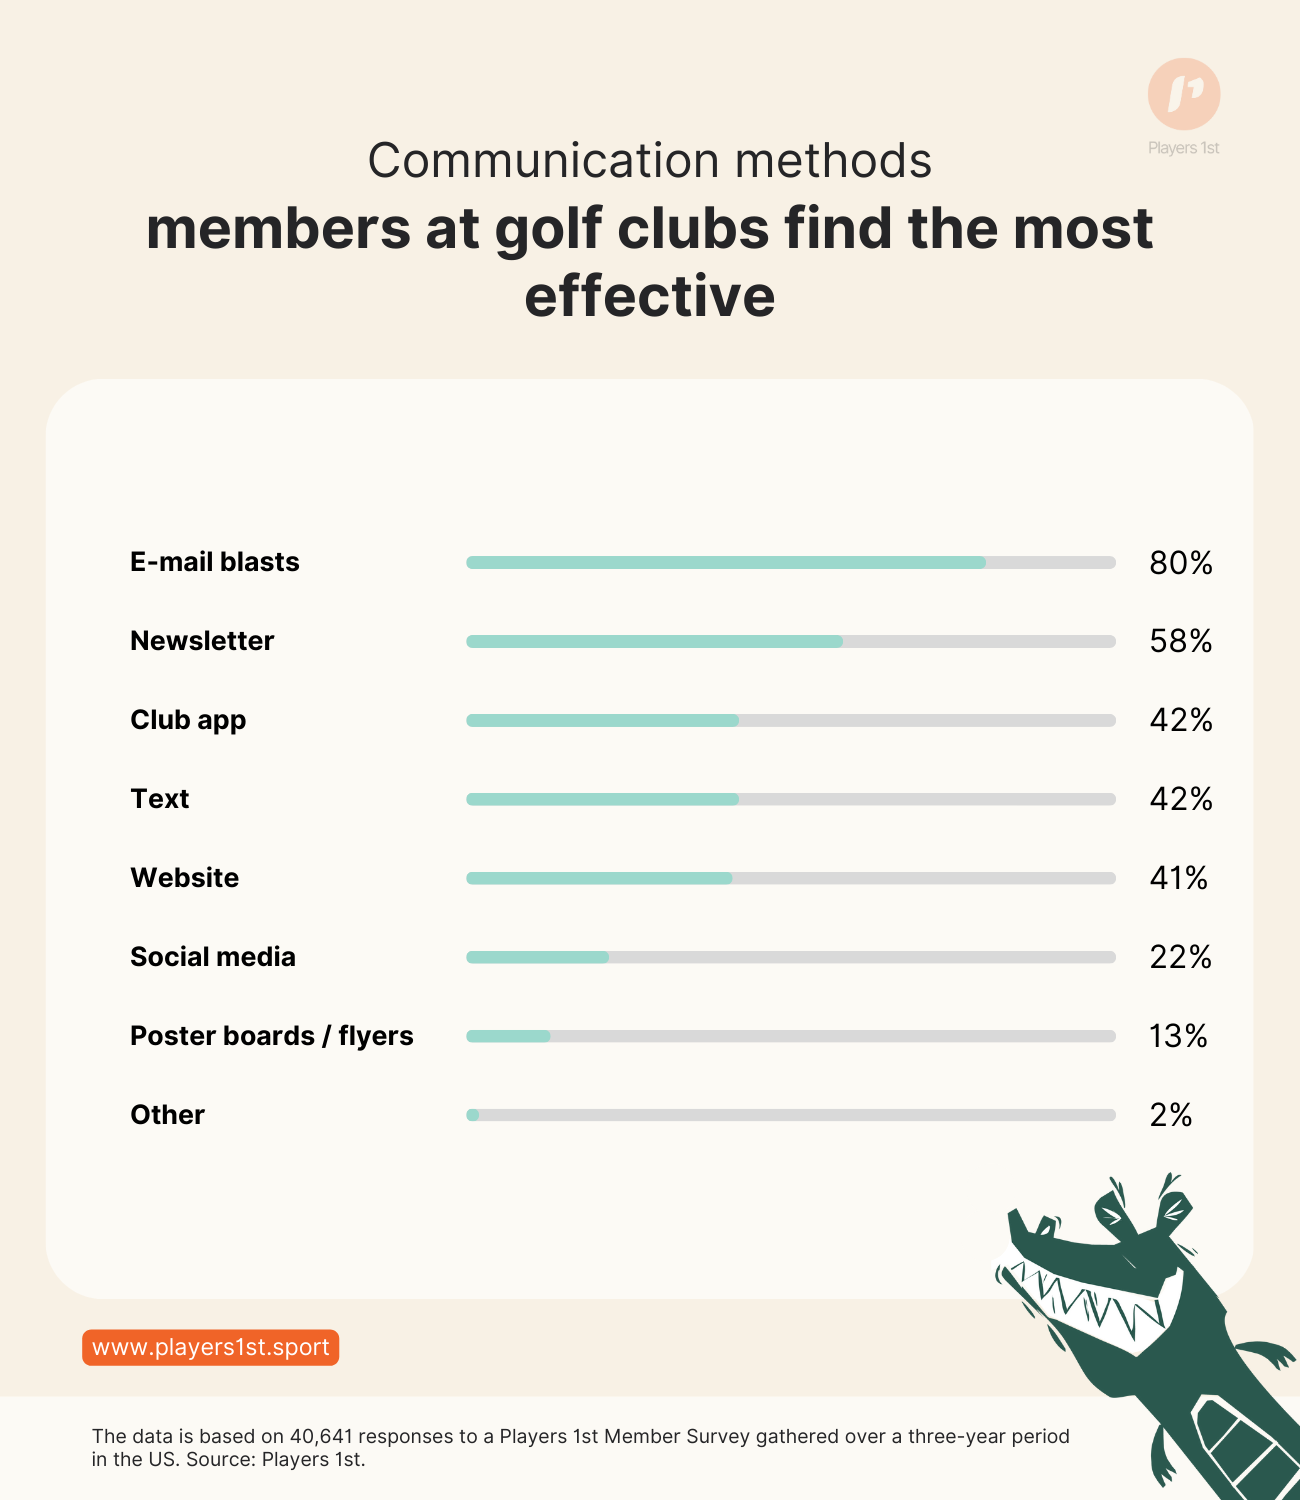 Figure 1: Communications methods that members at golf clubs find the most effective